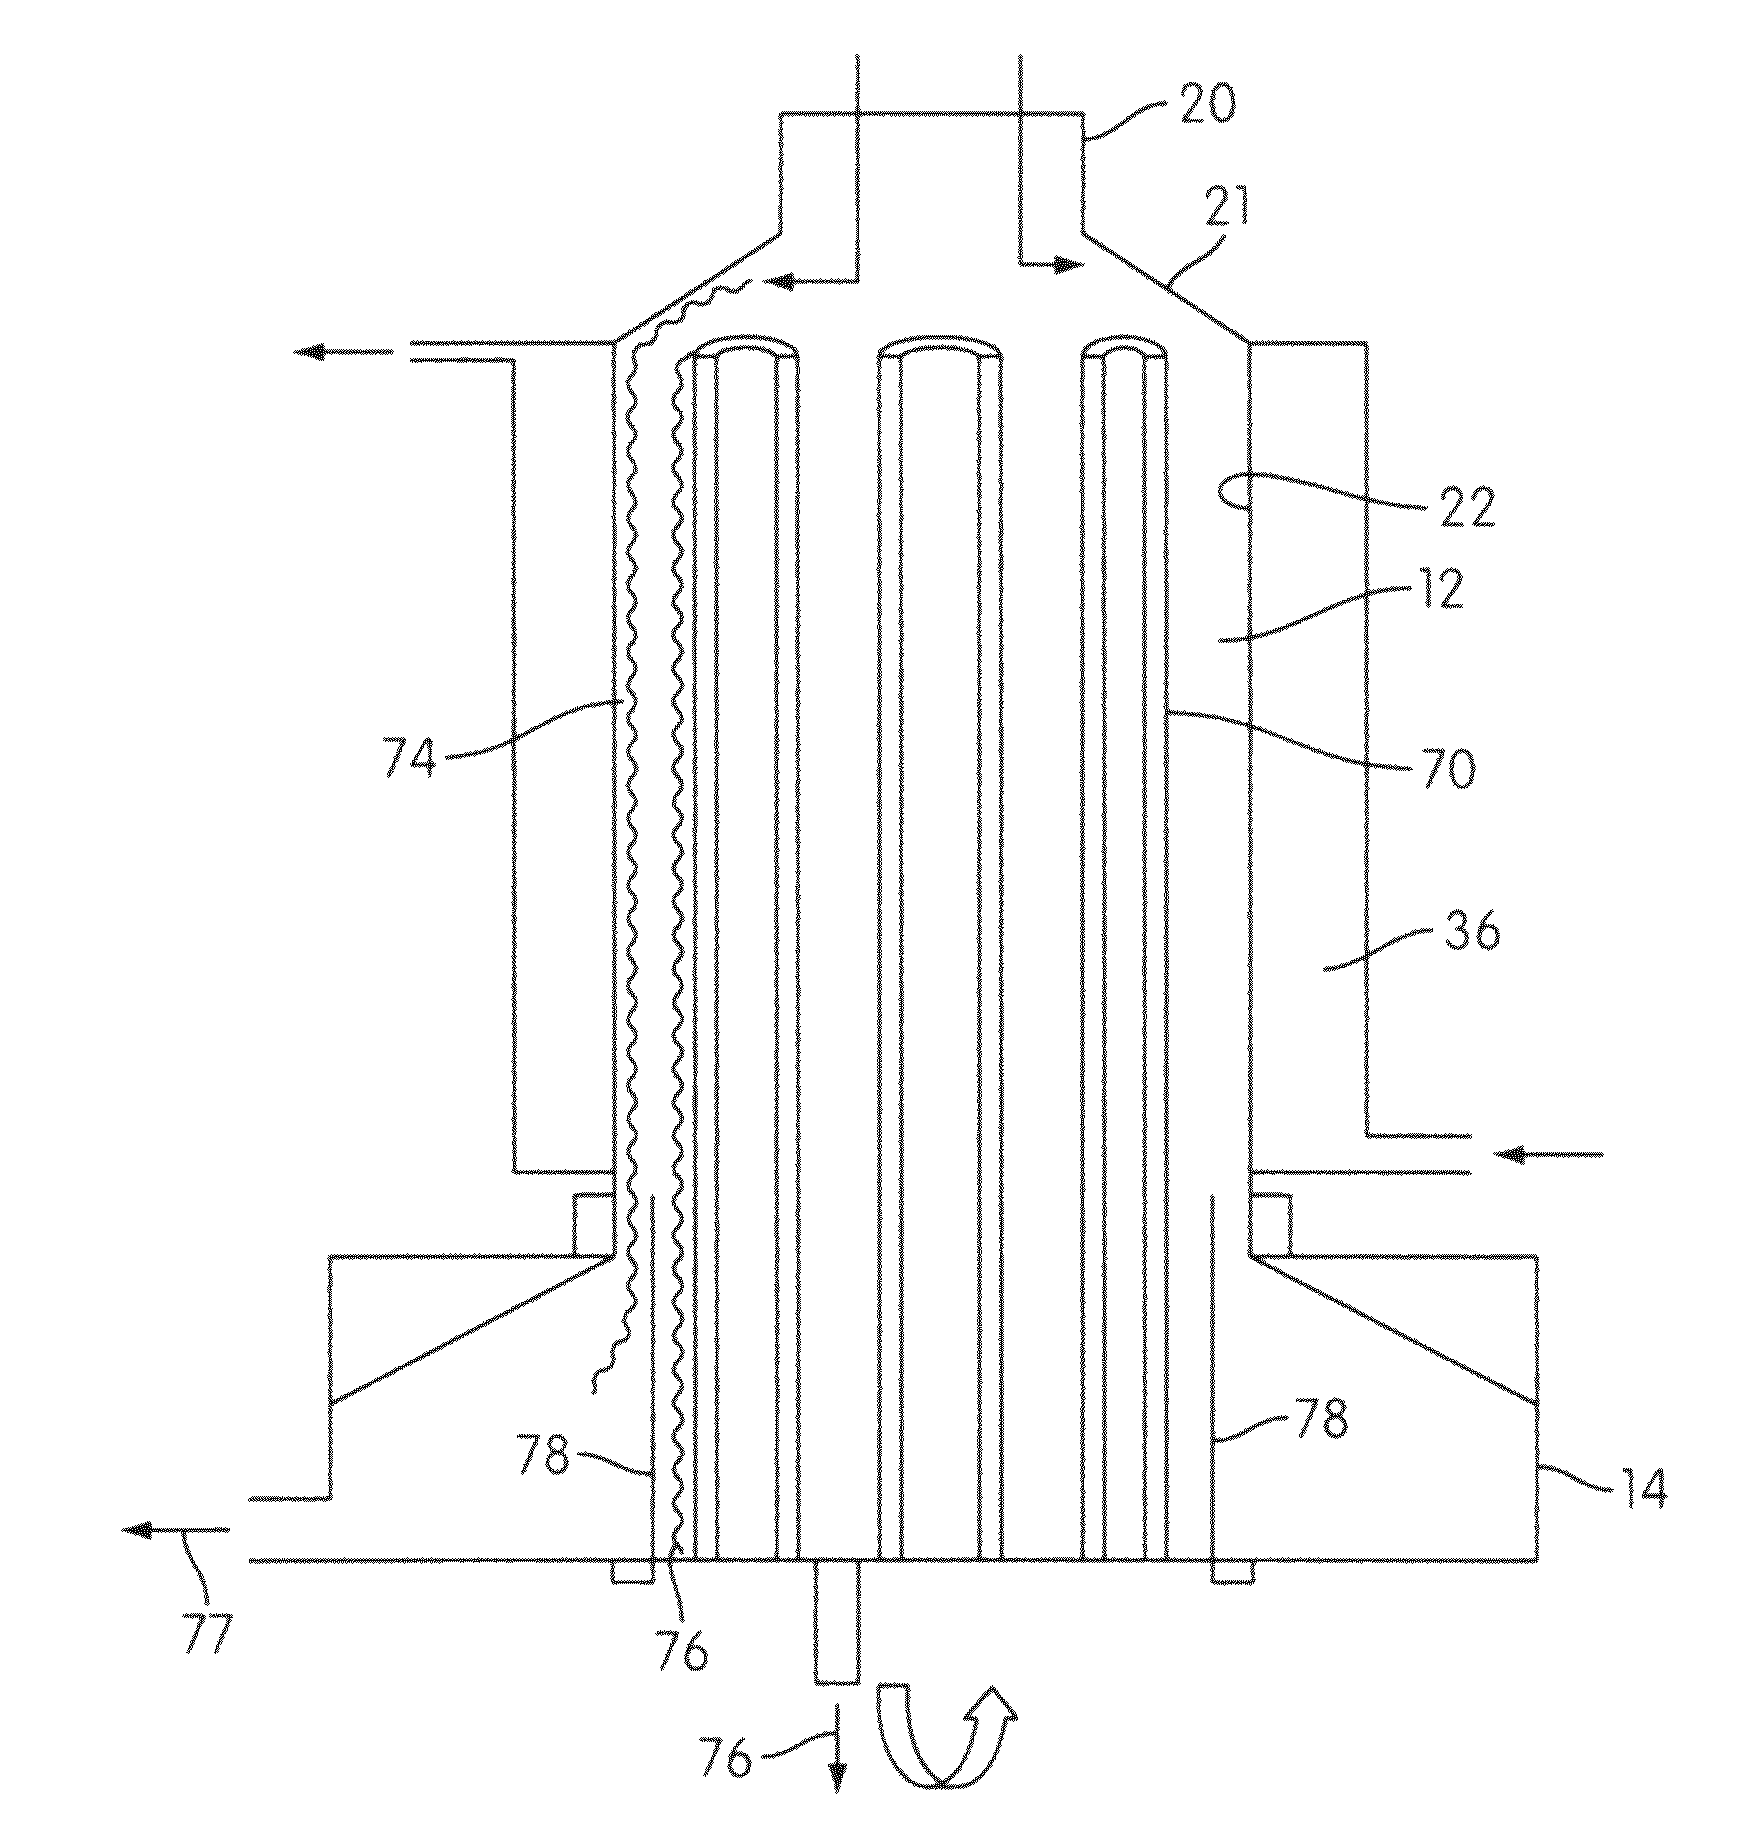 Thin film tube reactor with rotating reservoir